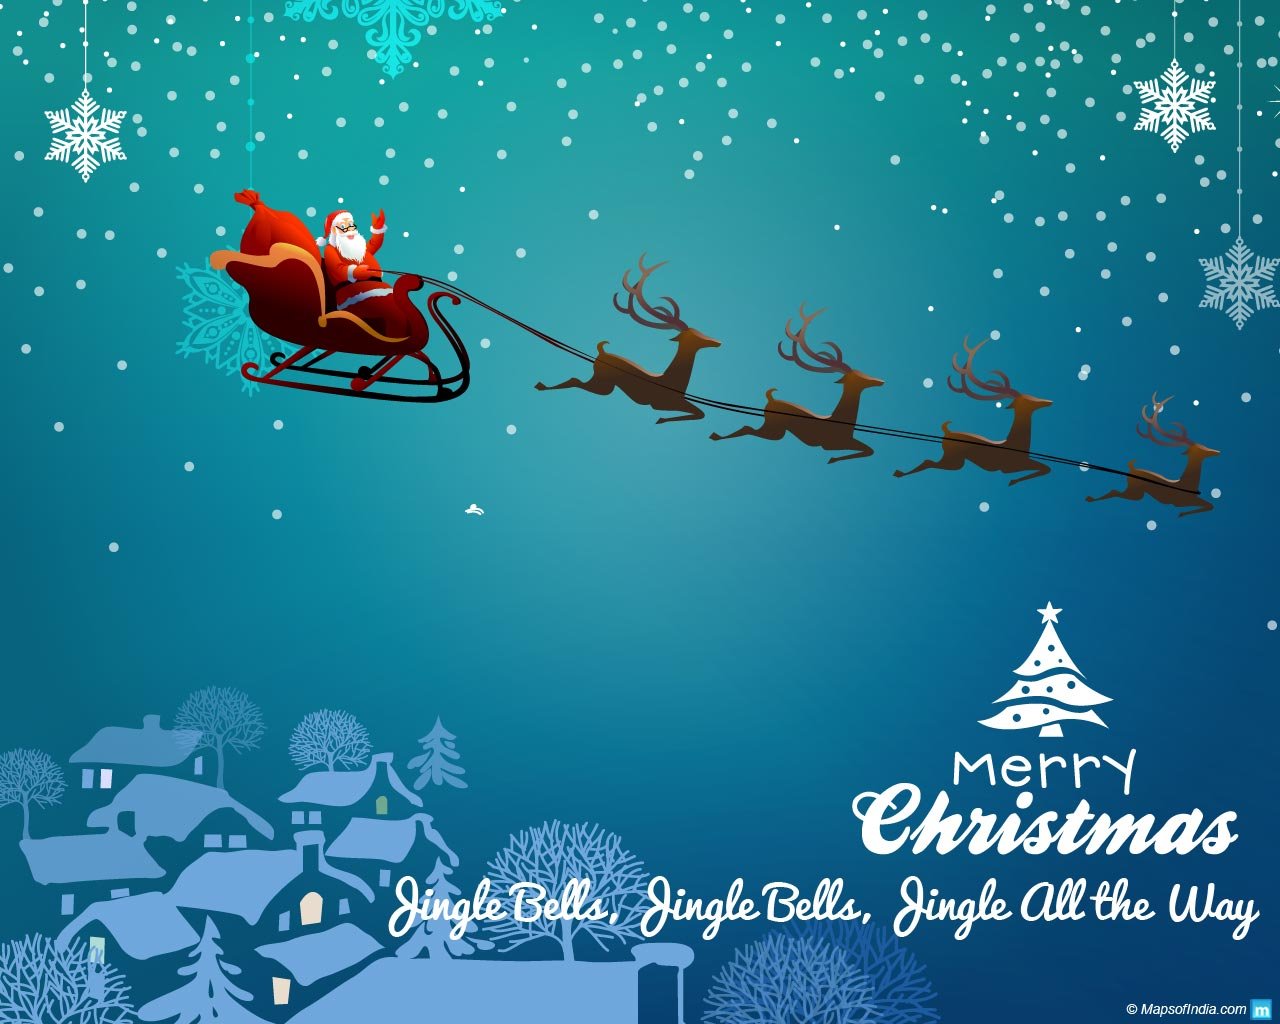 Christmas Wallpapers and Images 2018 Free Download Christmas